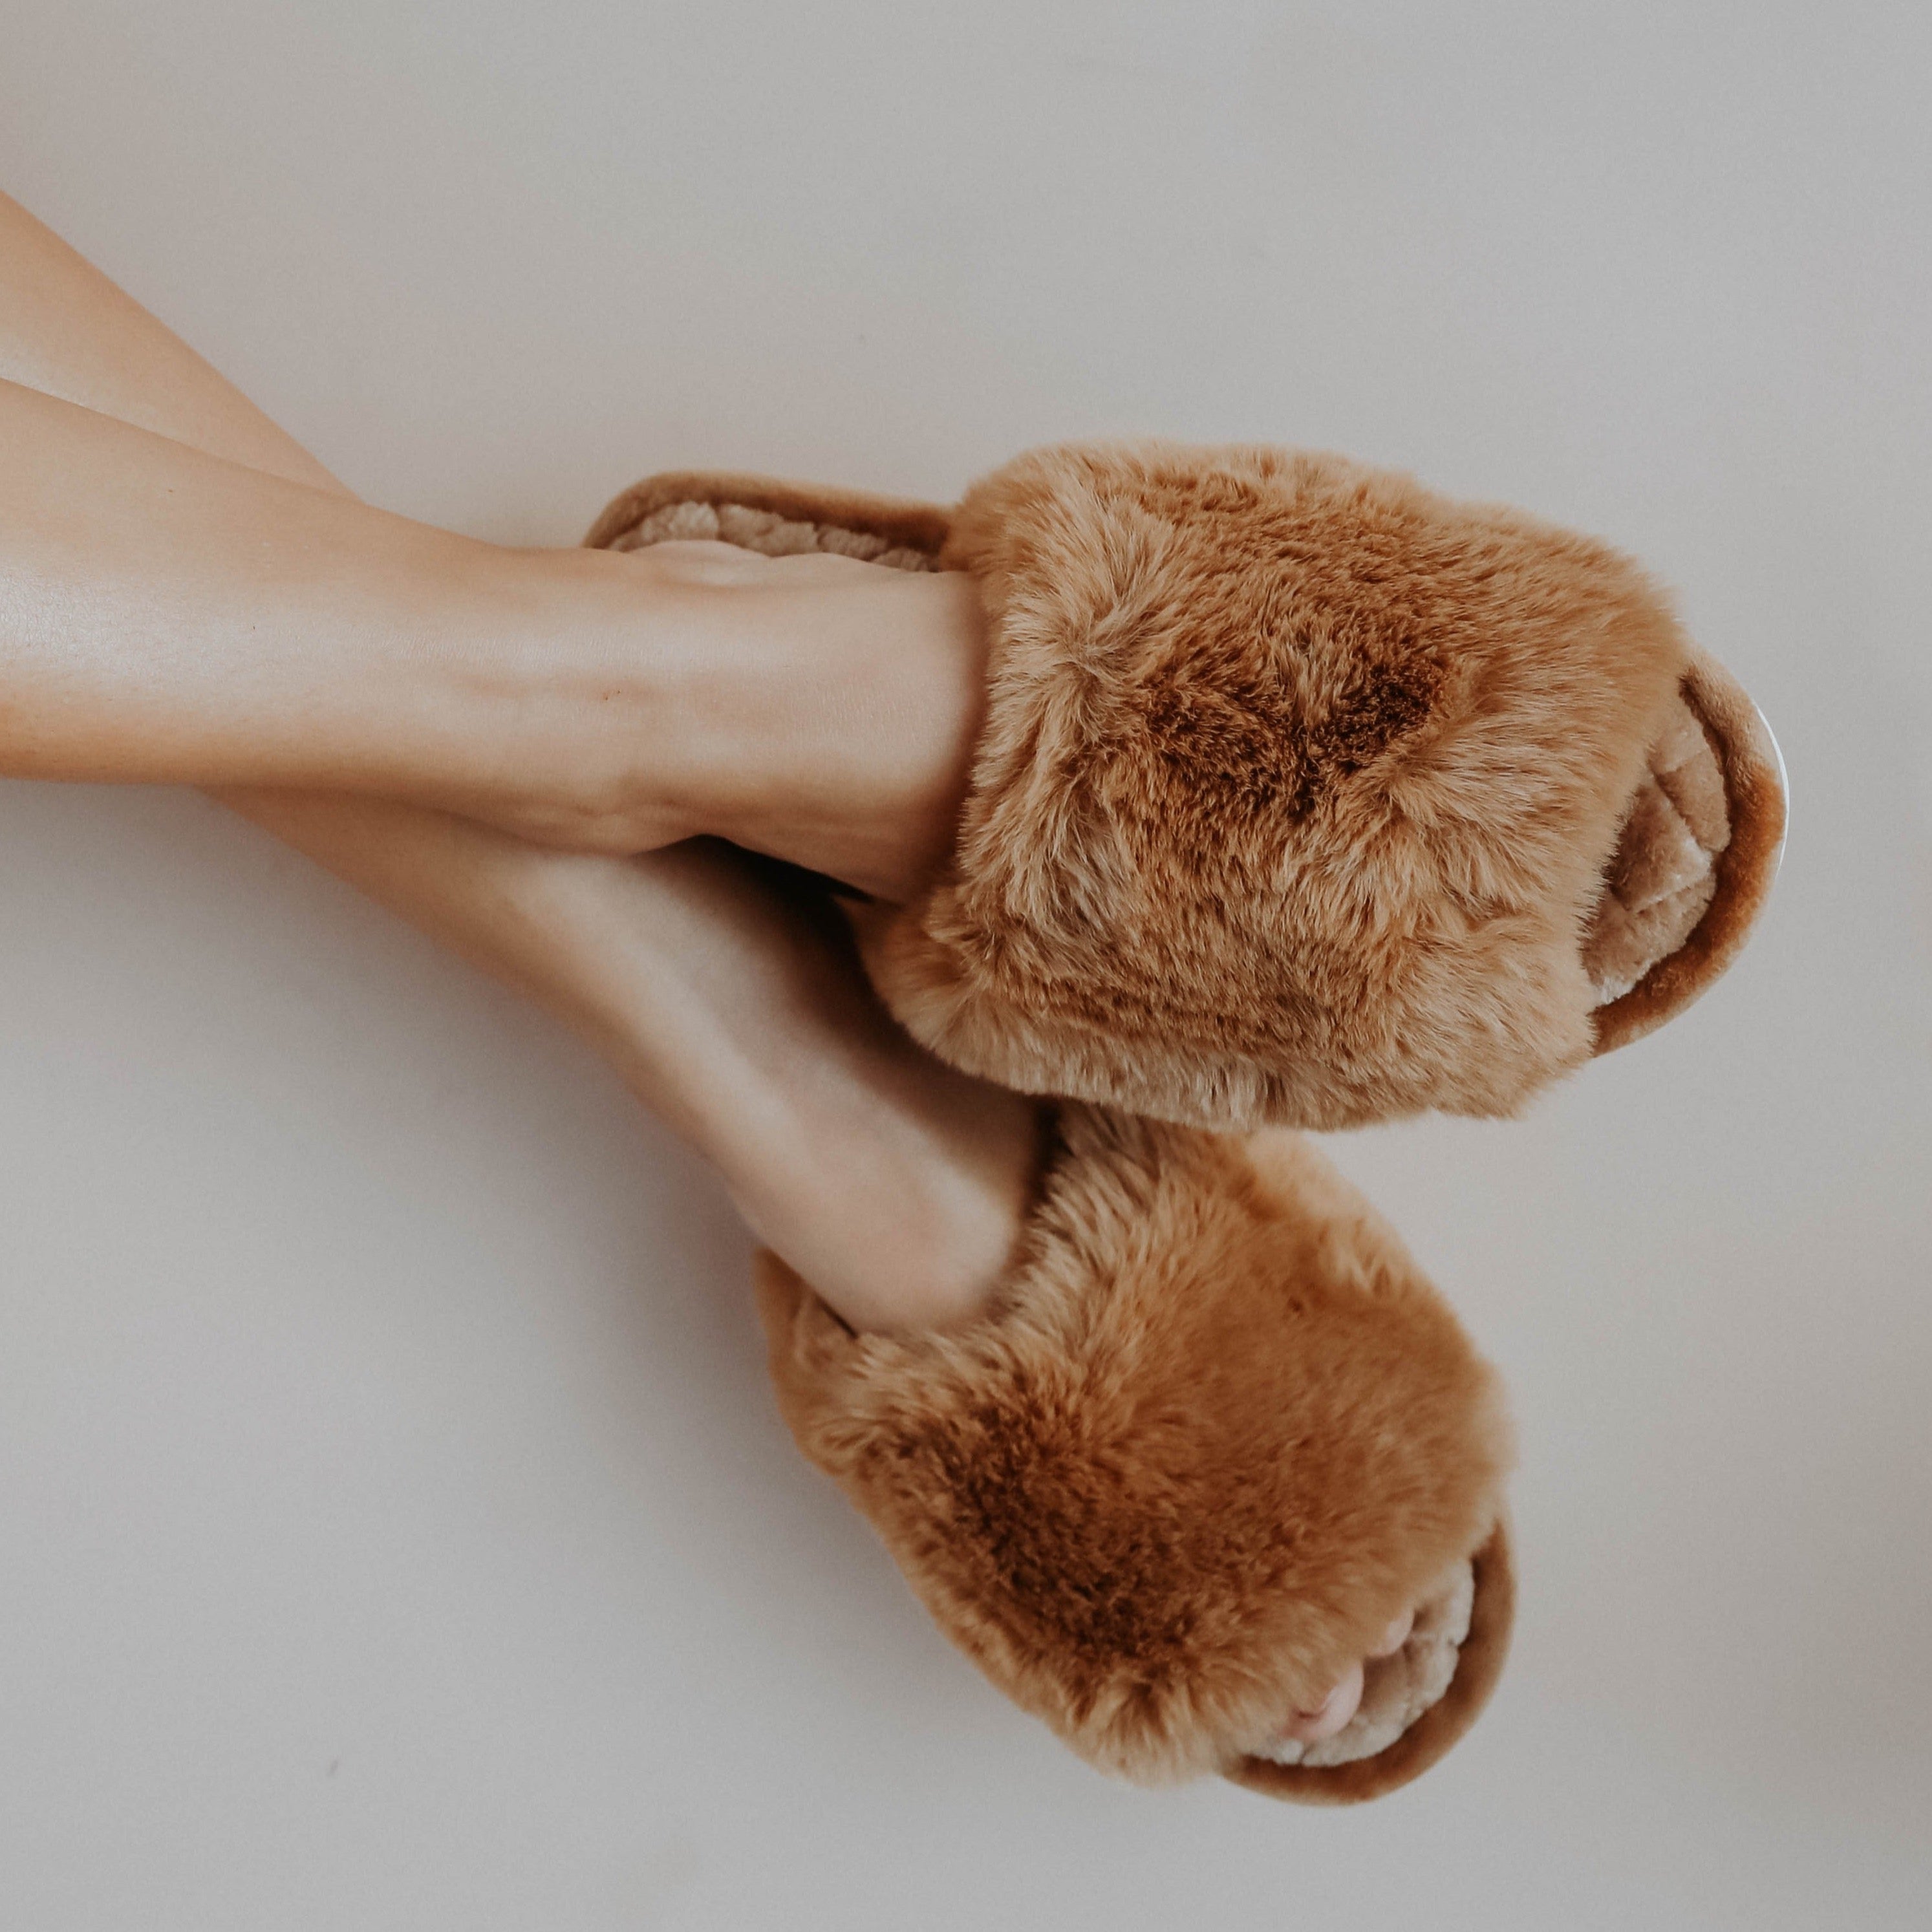 A girl crossing her legs wearing brown fuzzy slippers against a white background